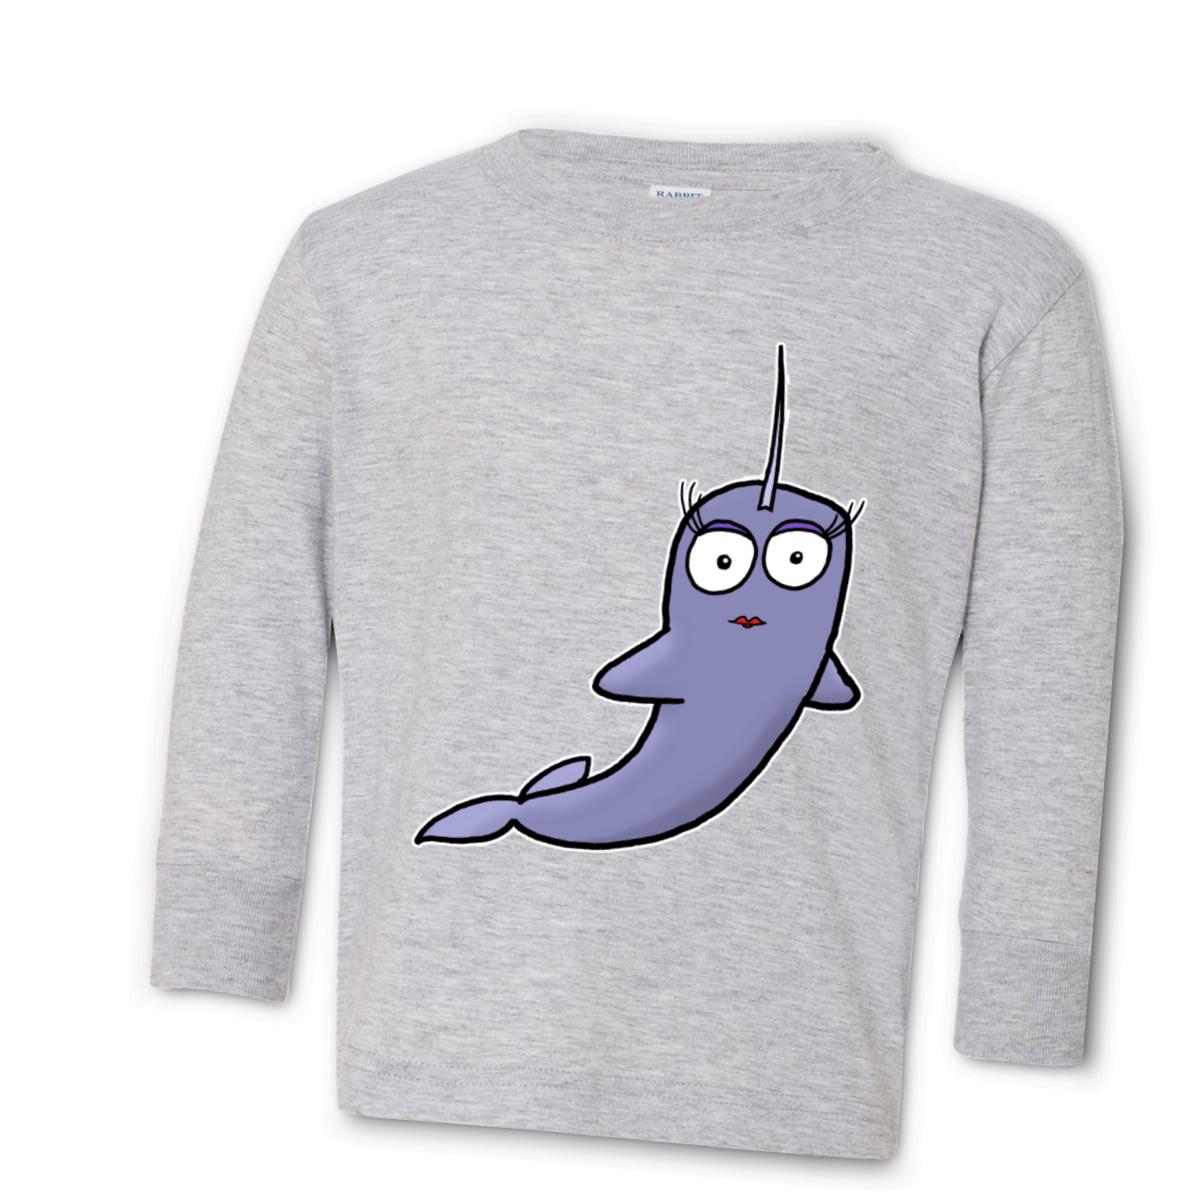 Narwhal Toddler Long Sleeve Tee 2T heather